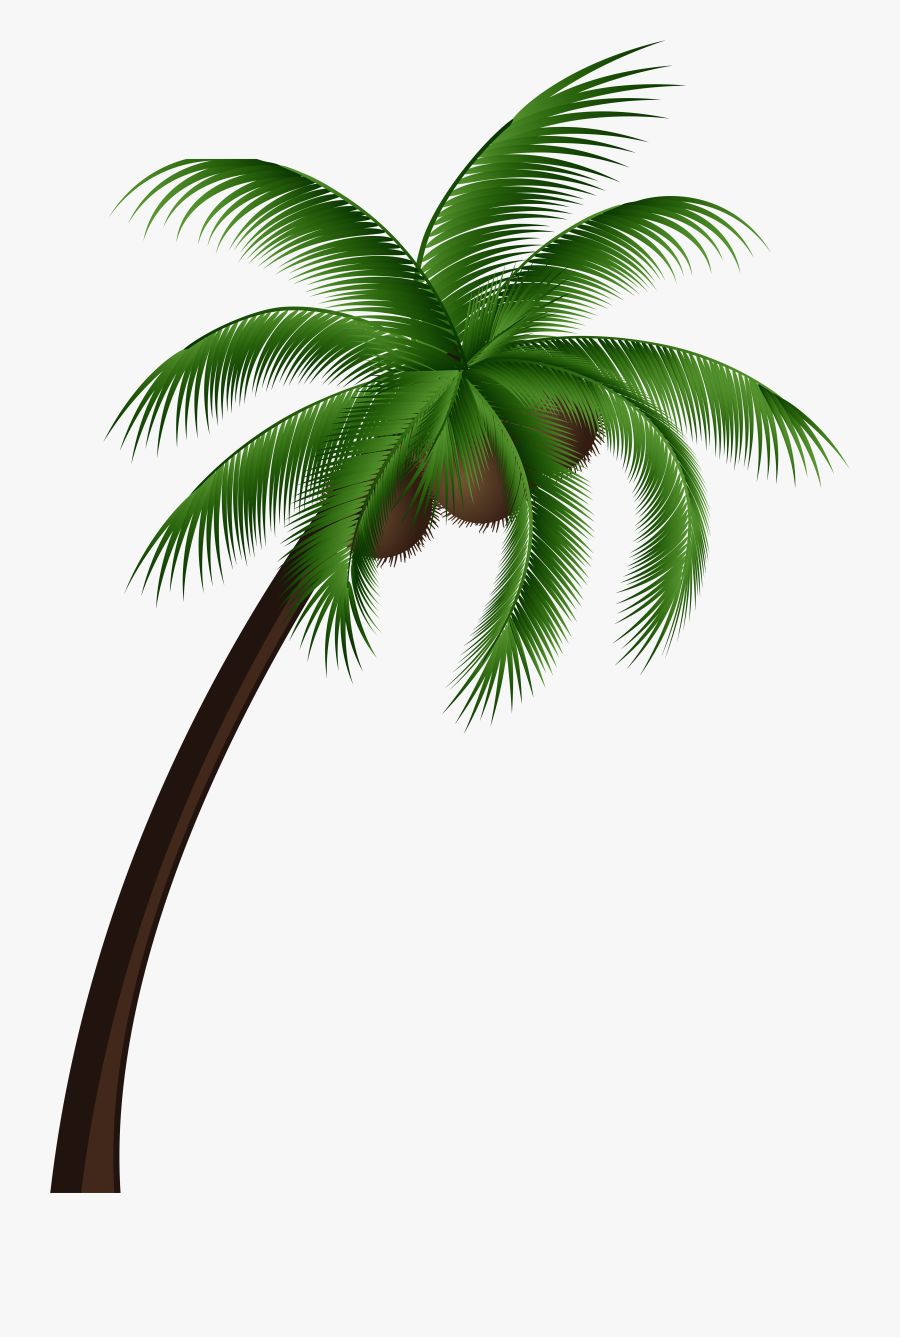 Tree Clipart Palm - Coconut Tree Vector Png, Transparent Clipart